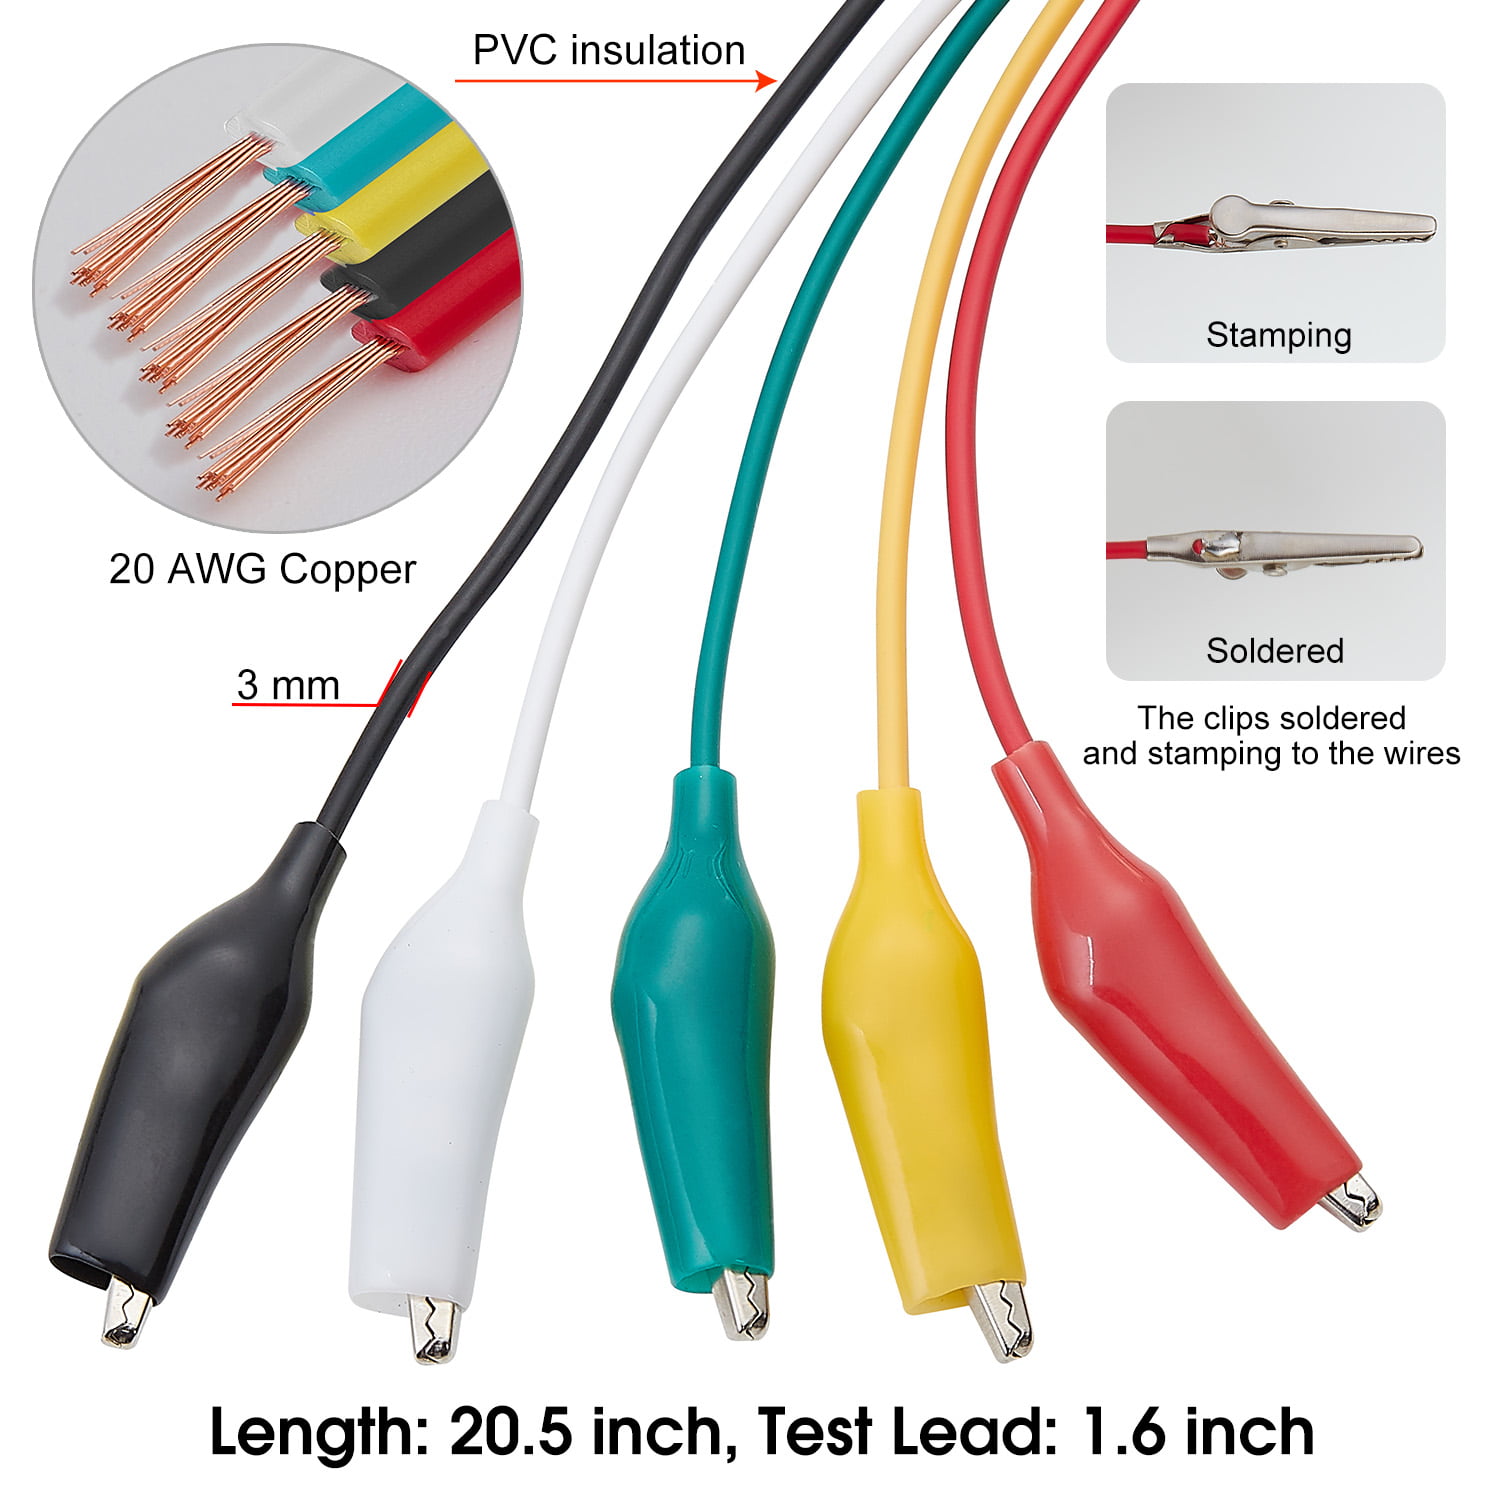 Details about   WGGE WG-026 10 Pieces and 5 Colors Test Lead Set & Alligator Clips,20.5 inches 